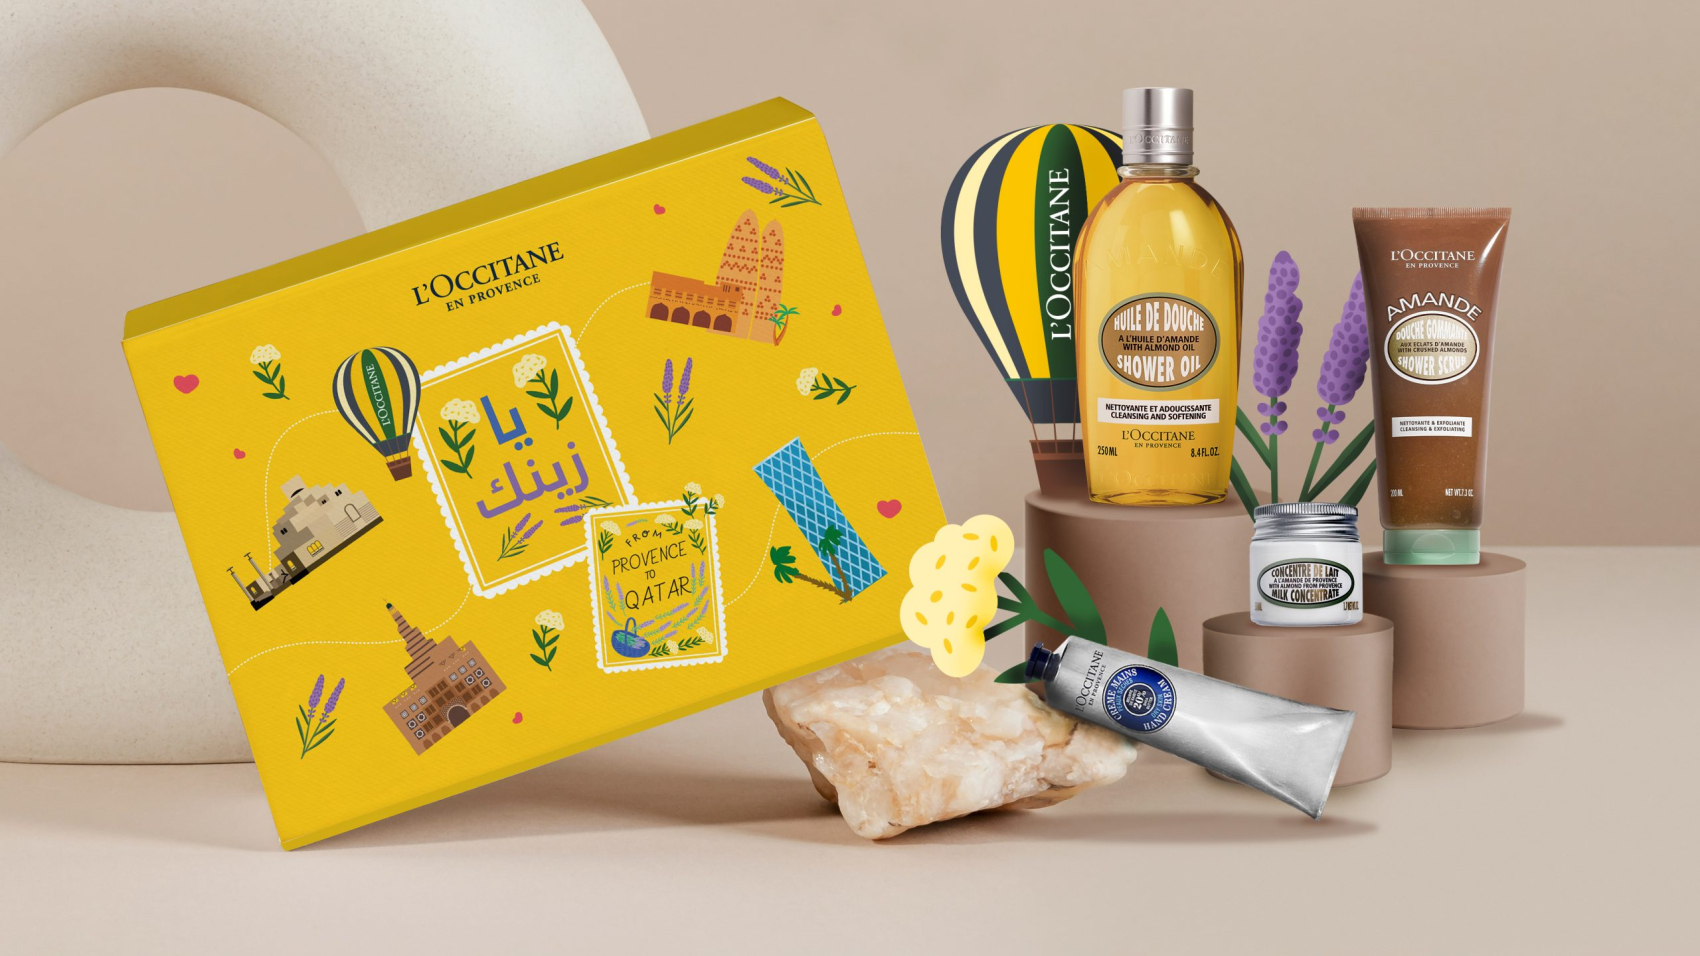 L'Occitane - From Province with Love